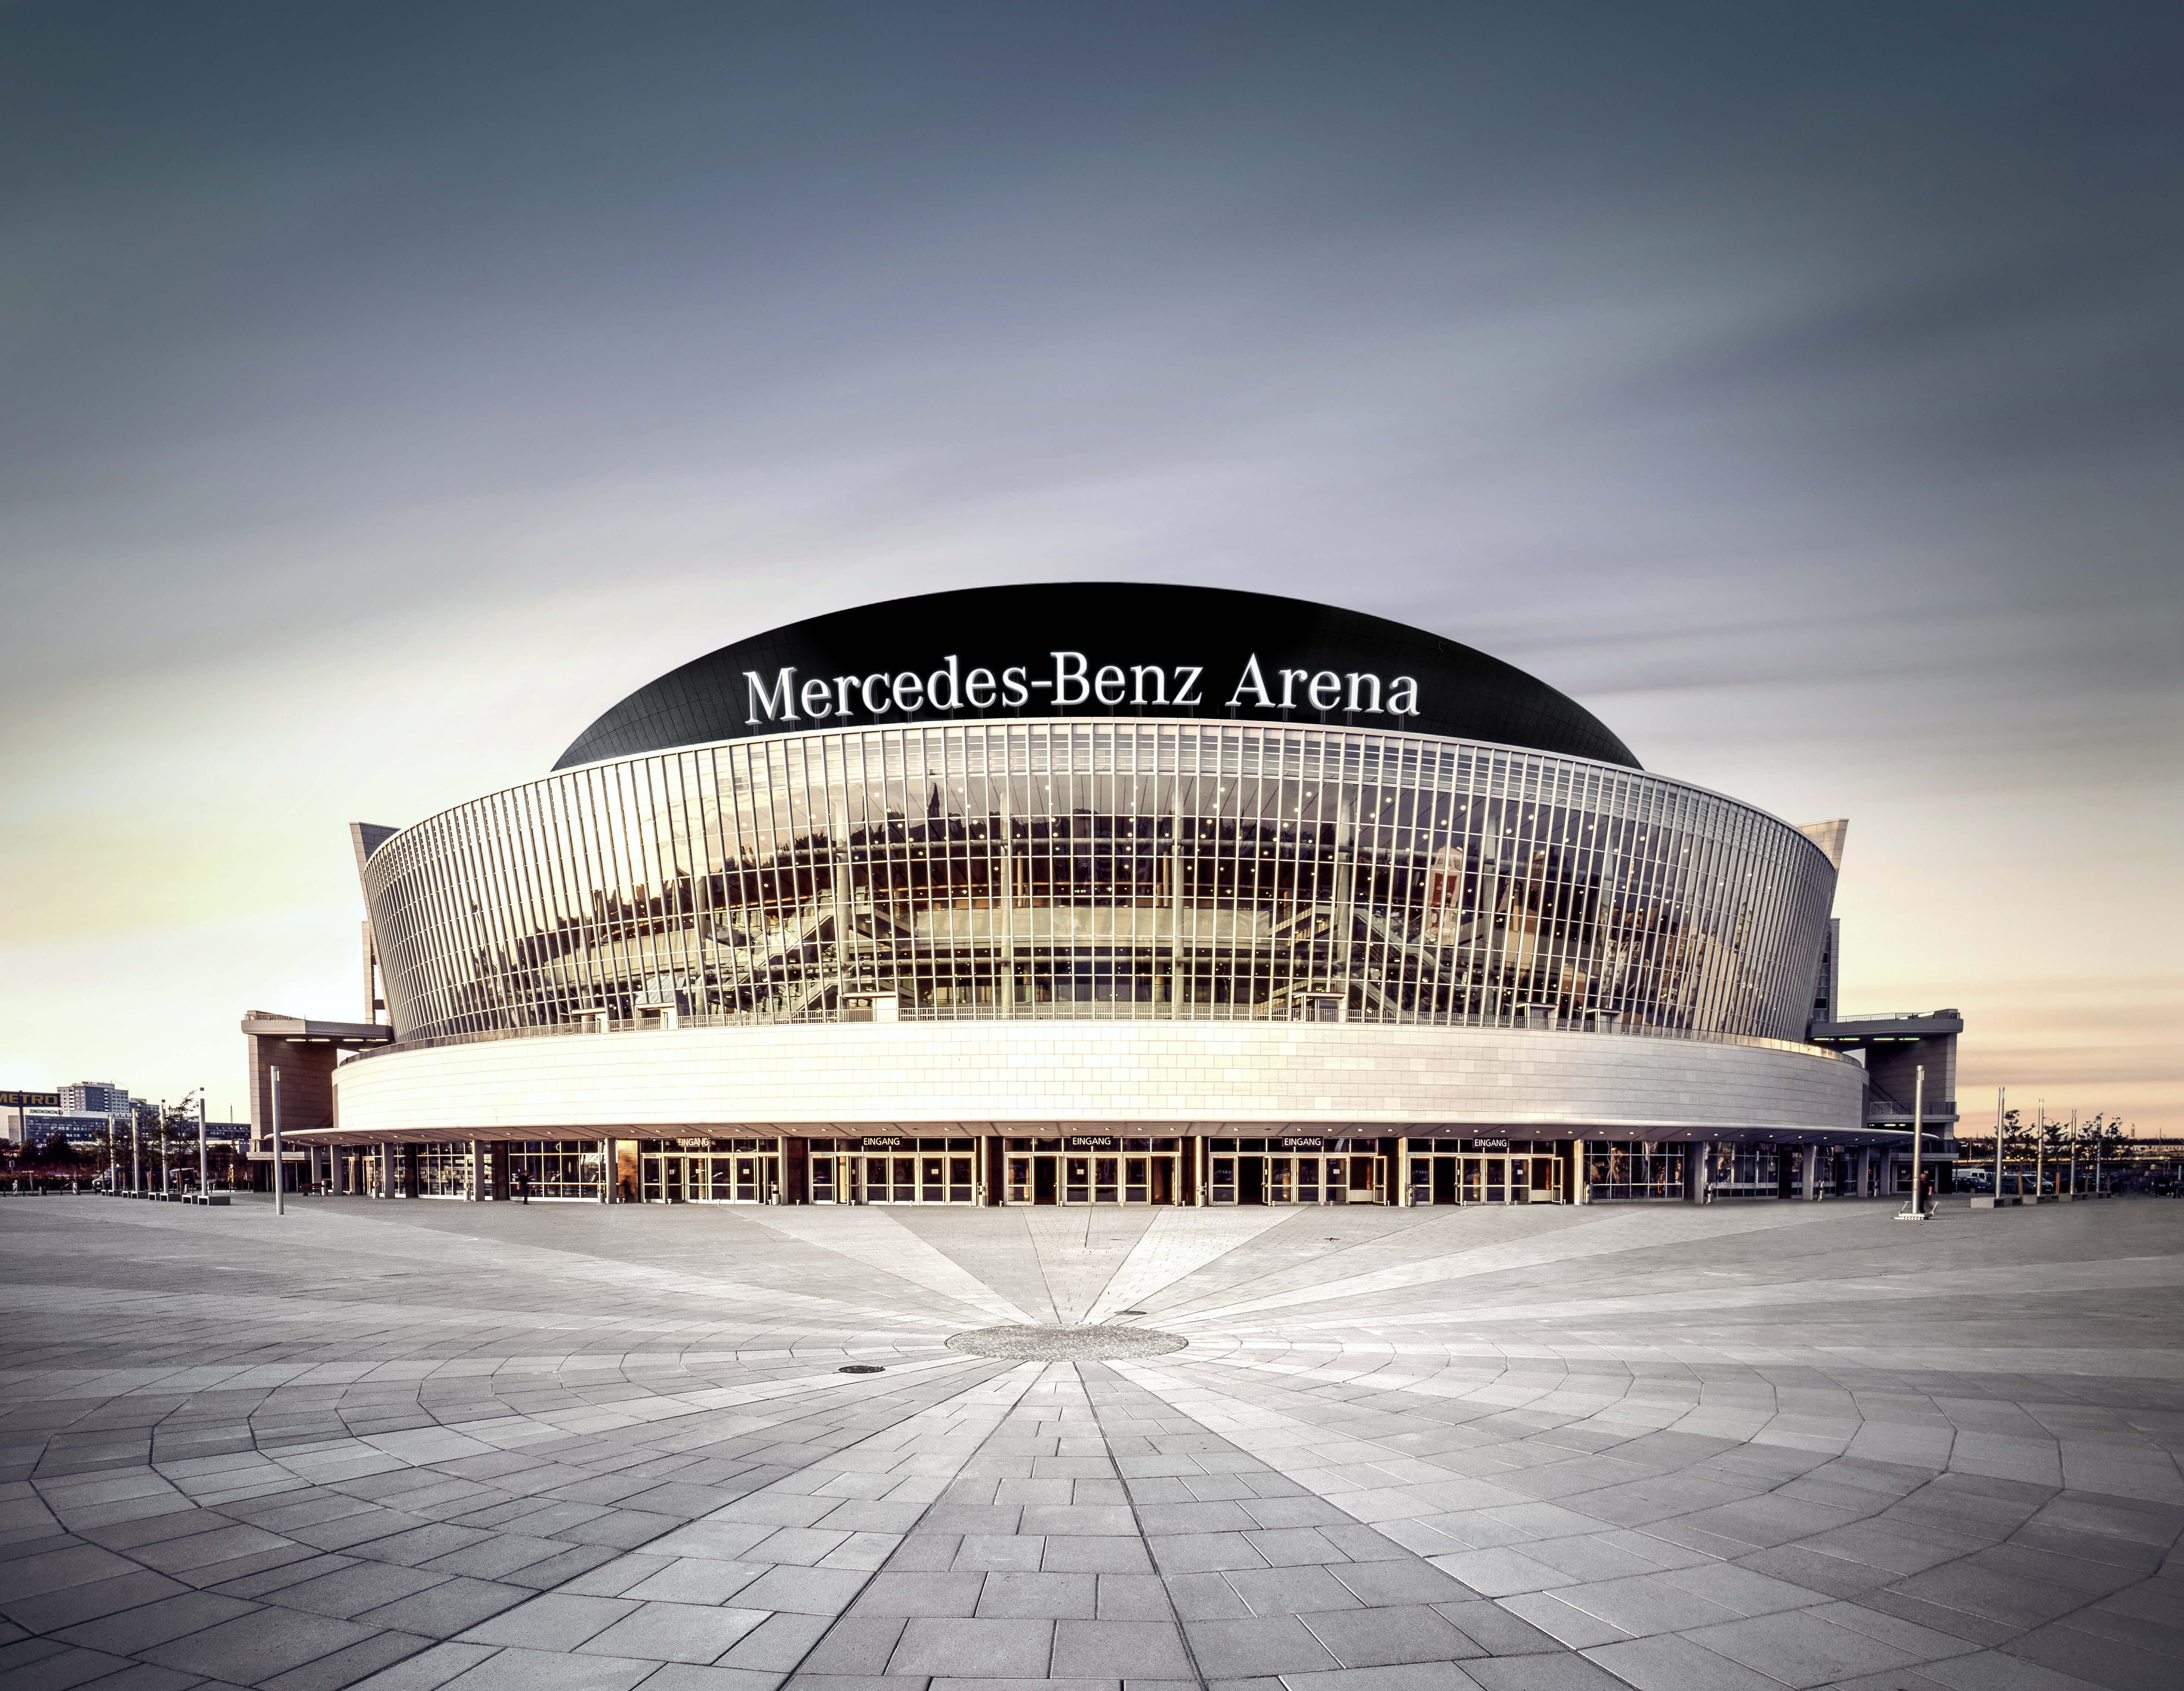 MercedesBenz Arena Berlin launches app to engage customers in new